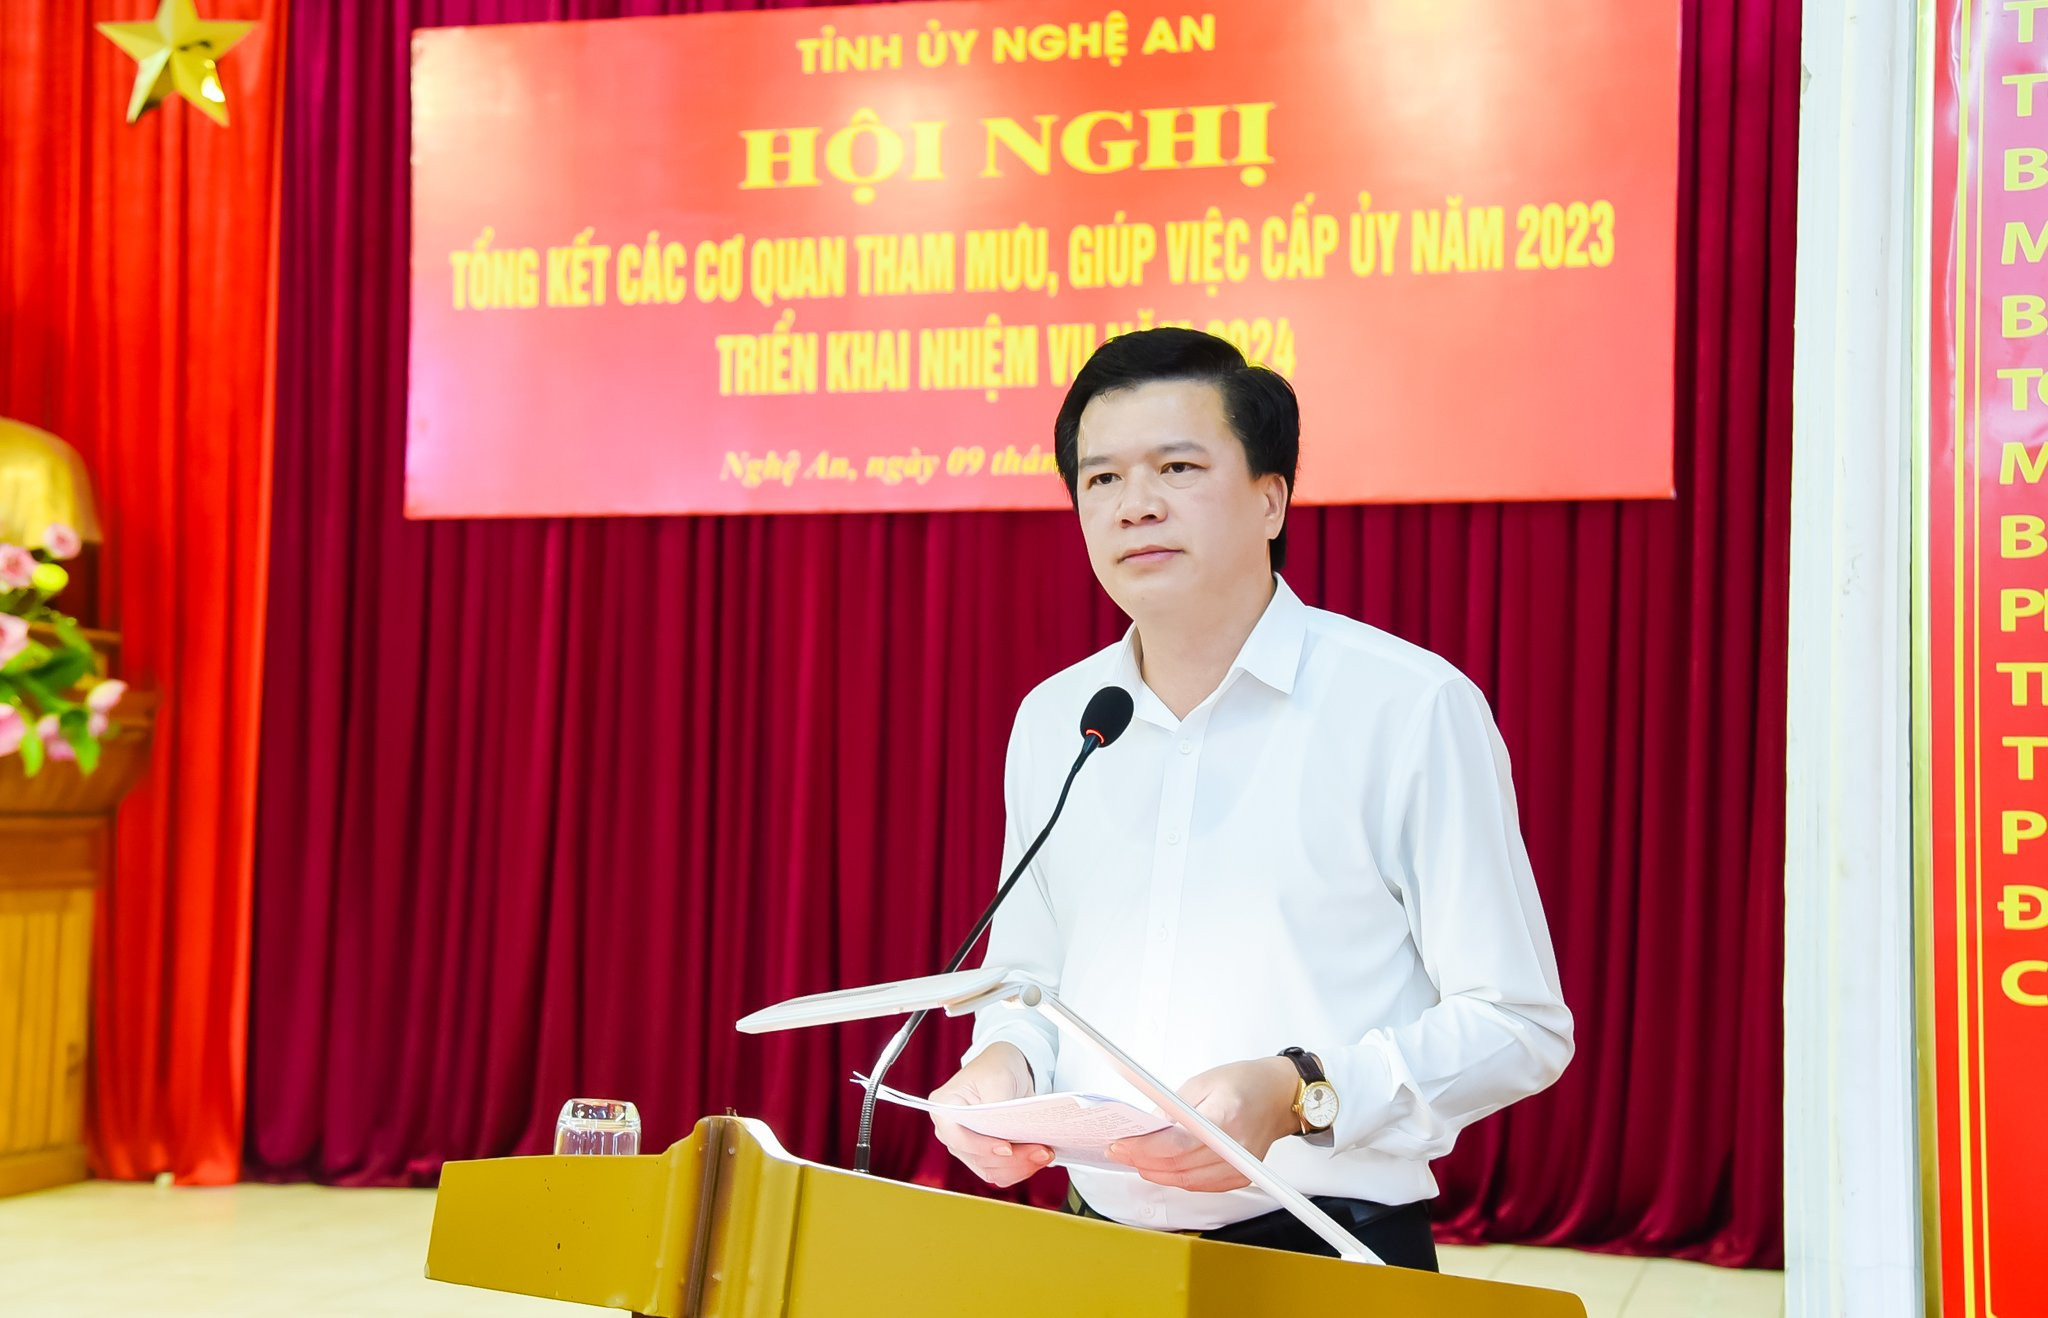 bna-a-hung-anh-thanh-le-9295.jpg